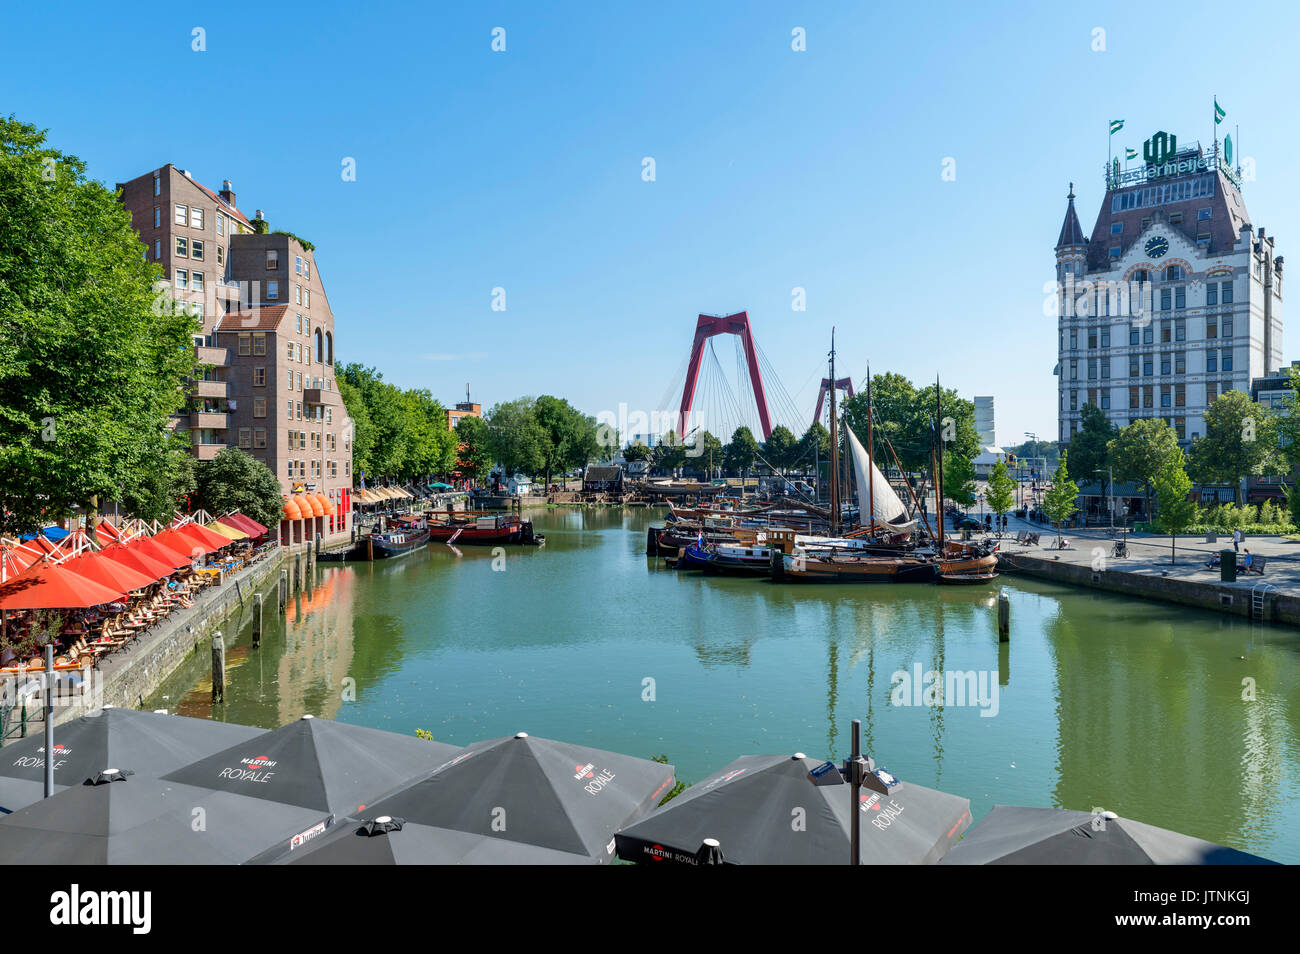 Oude Haven (Old Harbour), Rotterdam, Netherlands Stock Photo